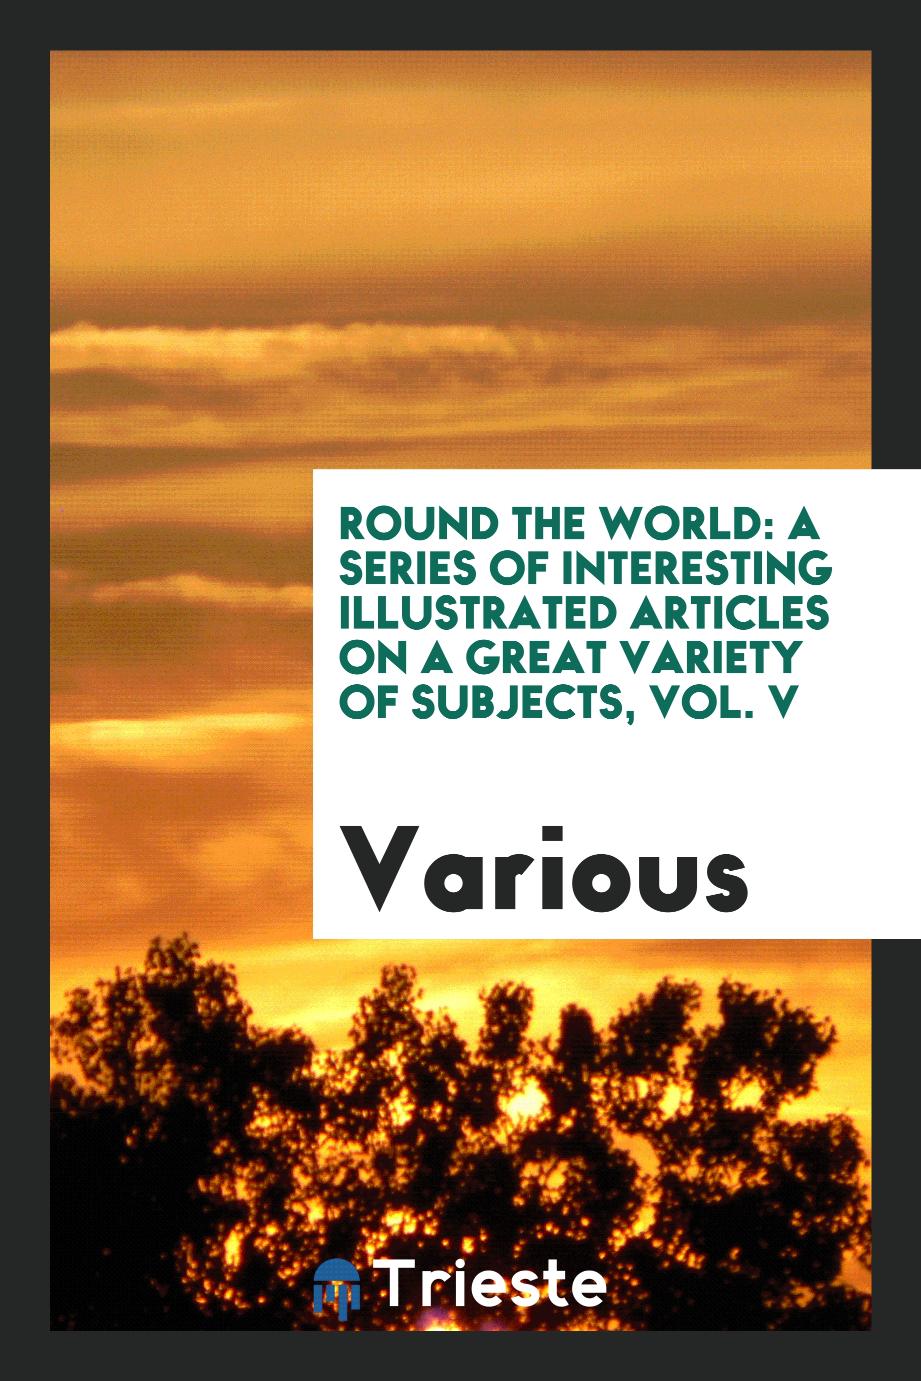 Round the World: A Series of Interesting Illustrated Articles on a Great Variety of Subjects, Vol. V